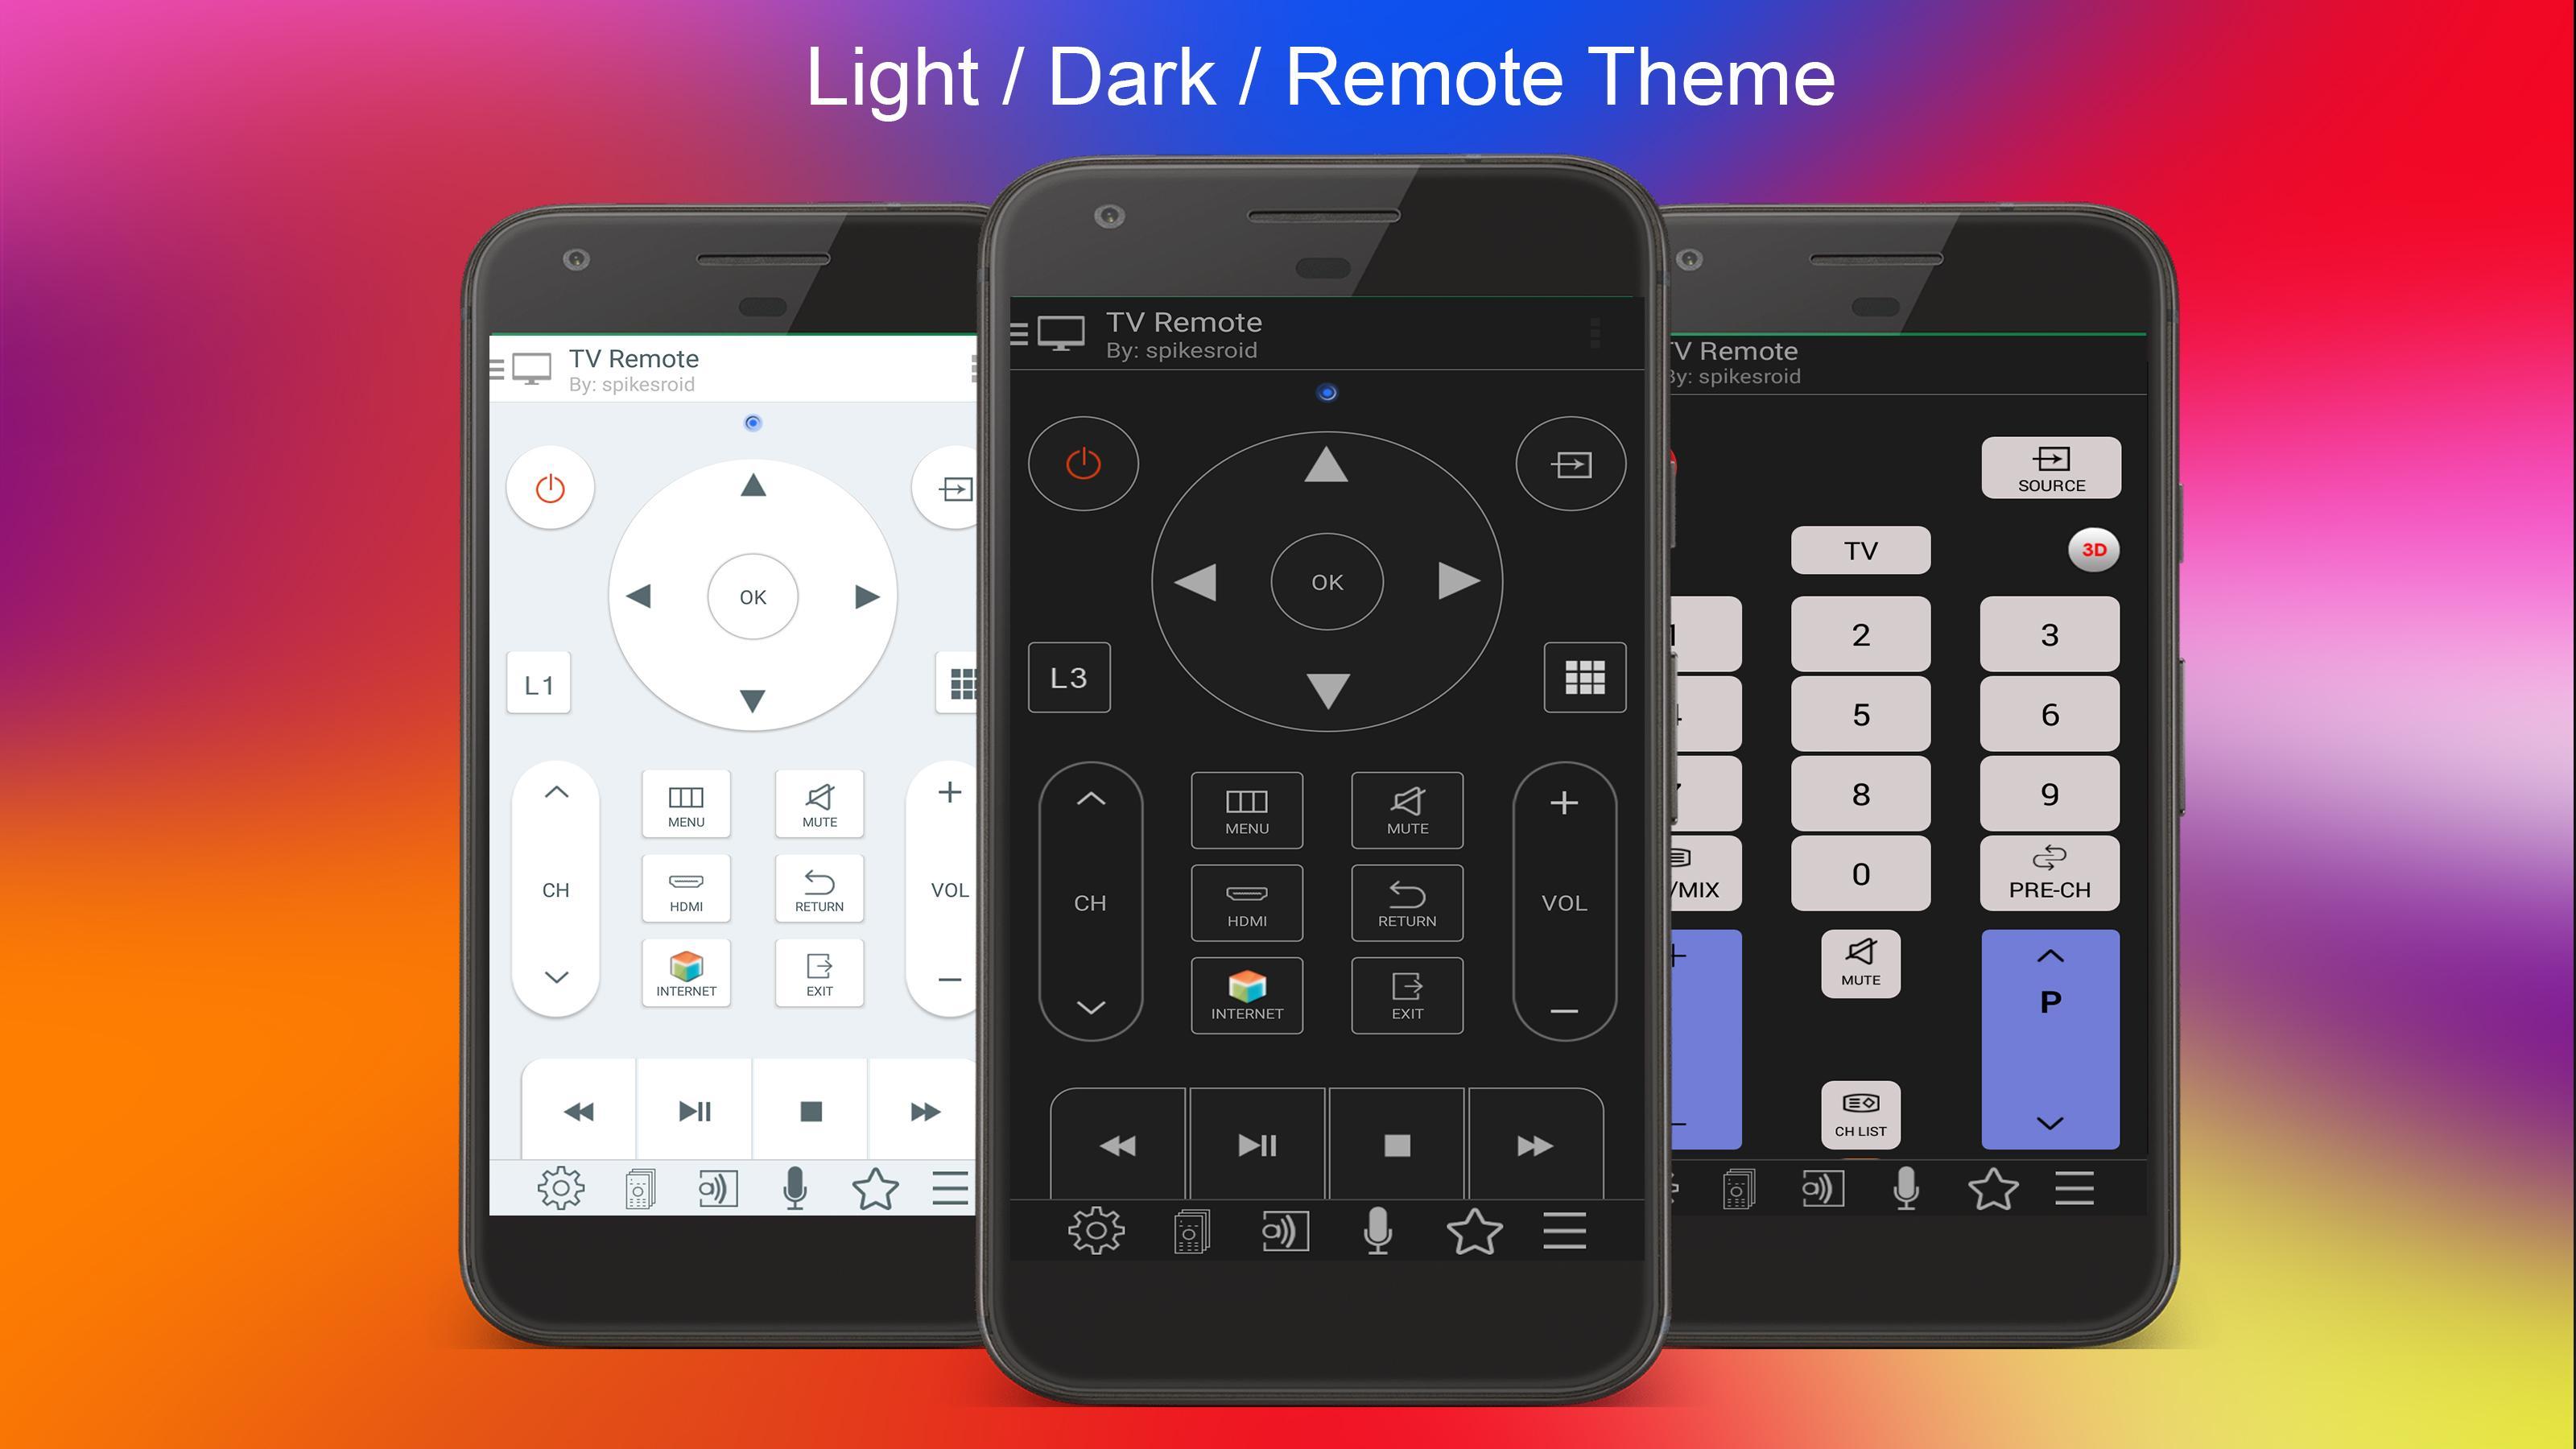 TV Remote for Philips (Smart TV Remote Control) for Android - APK Download